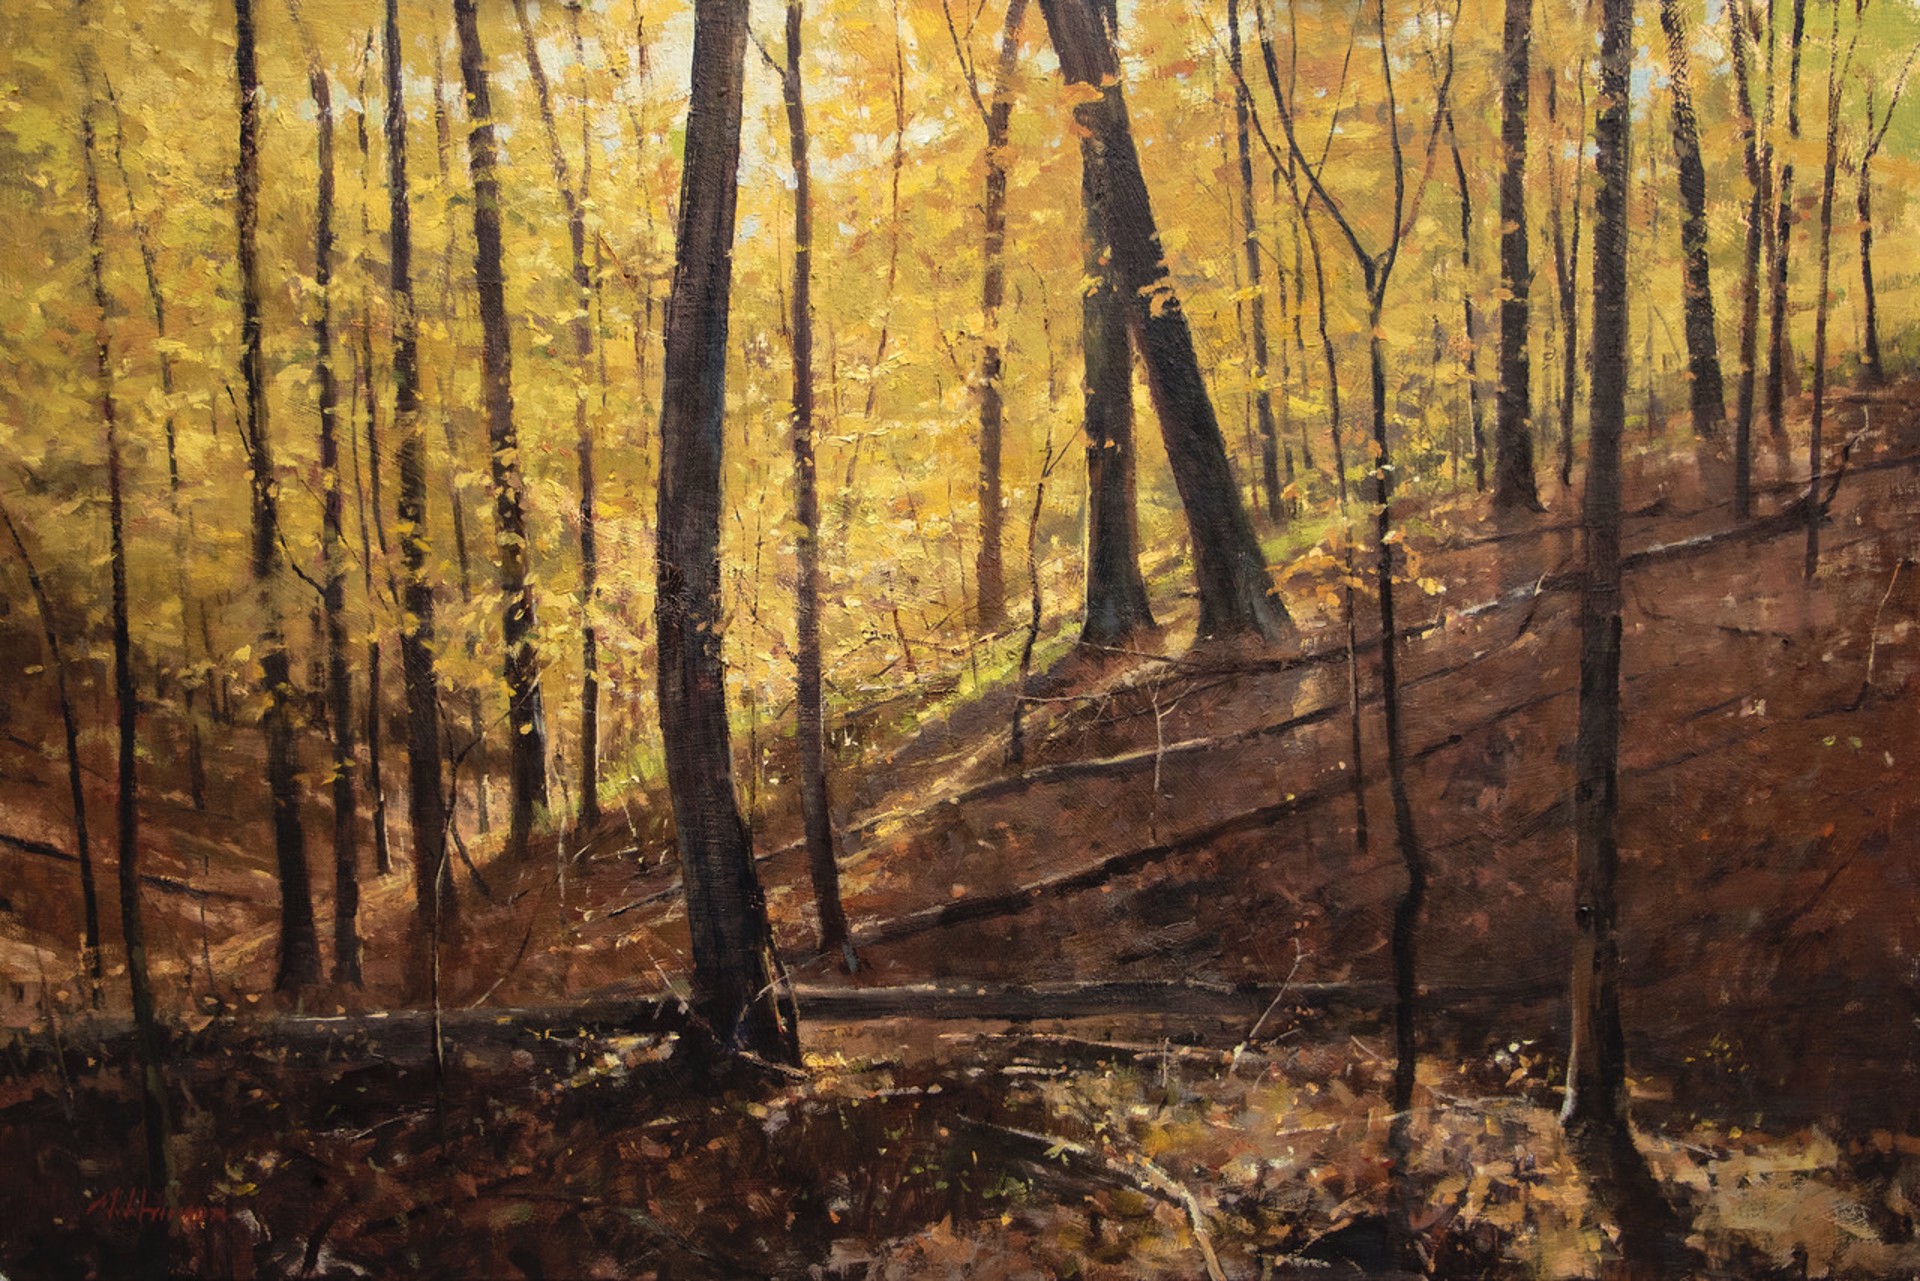 Woods of Gold by Marc Hanson, OPAM